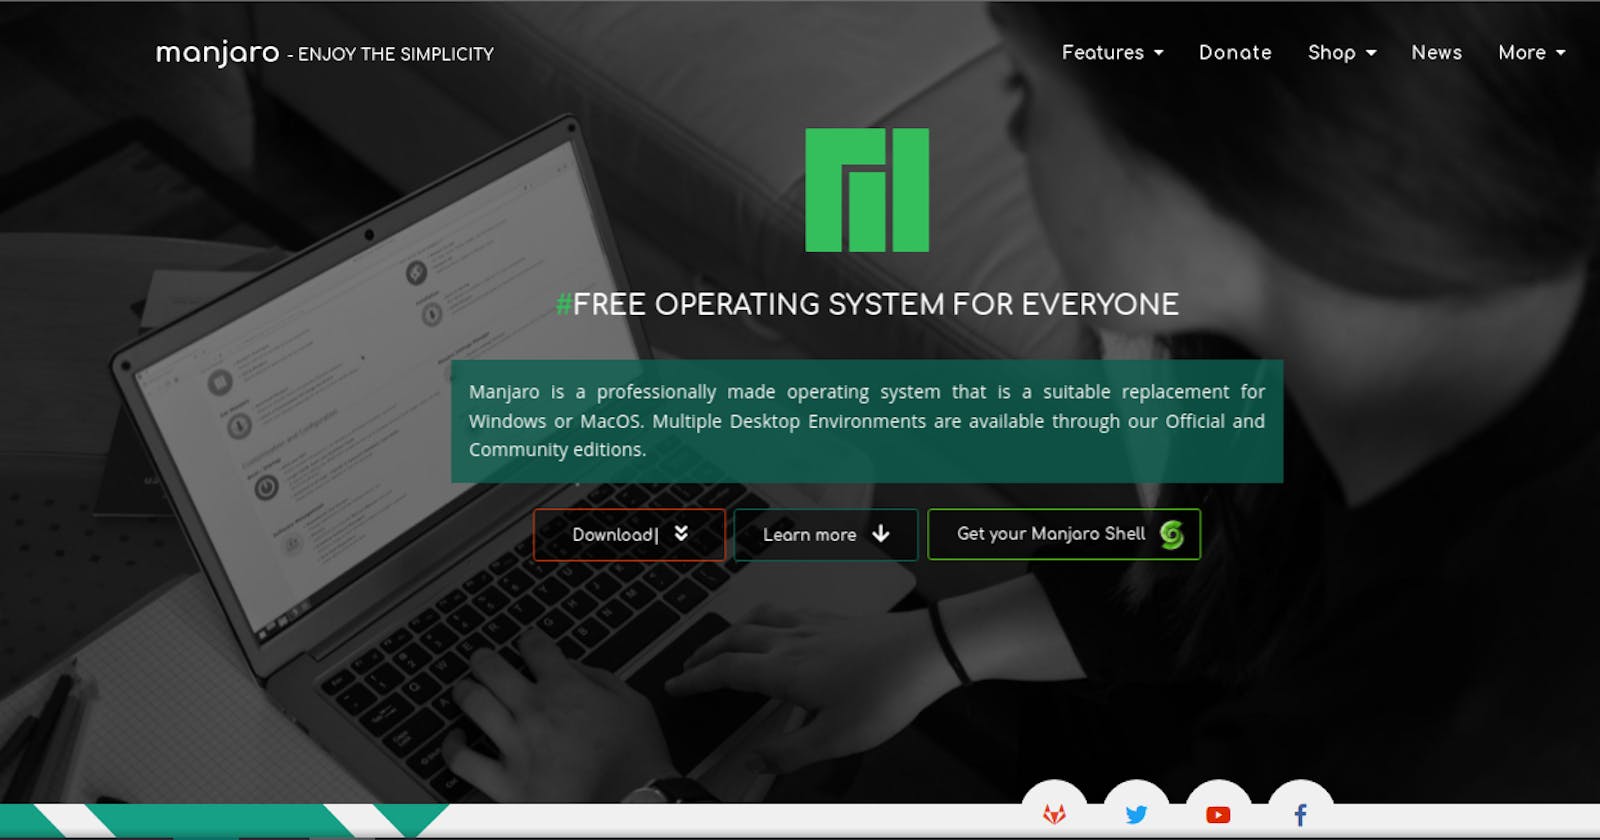 My Thought on Using Manjaro Linux